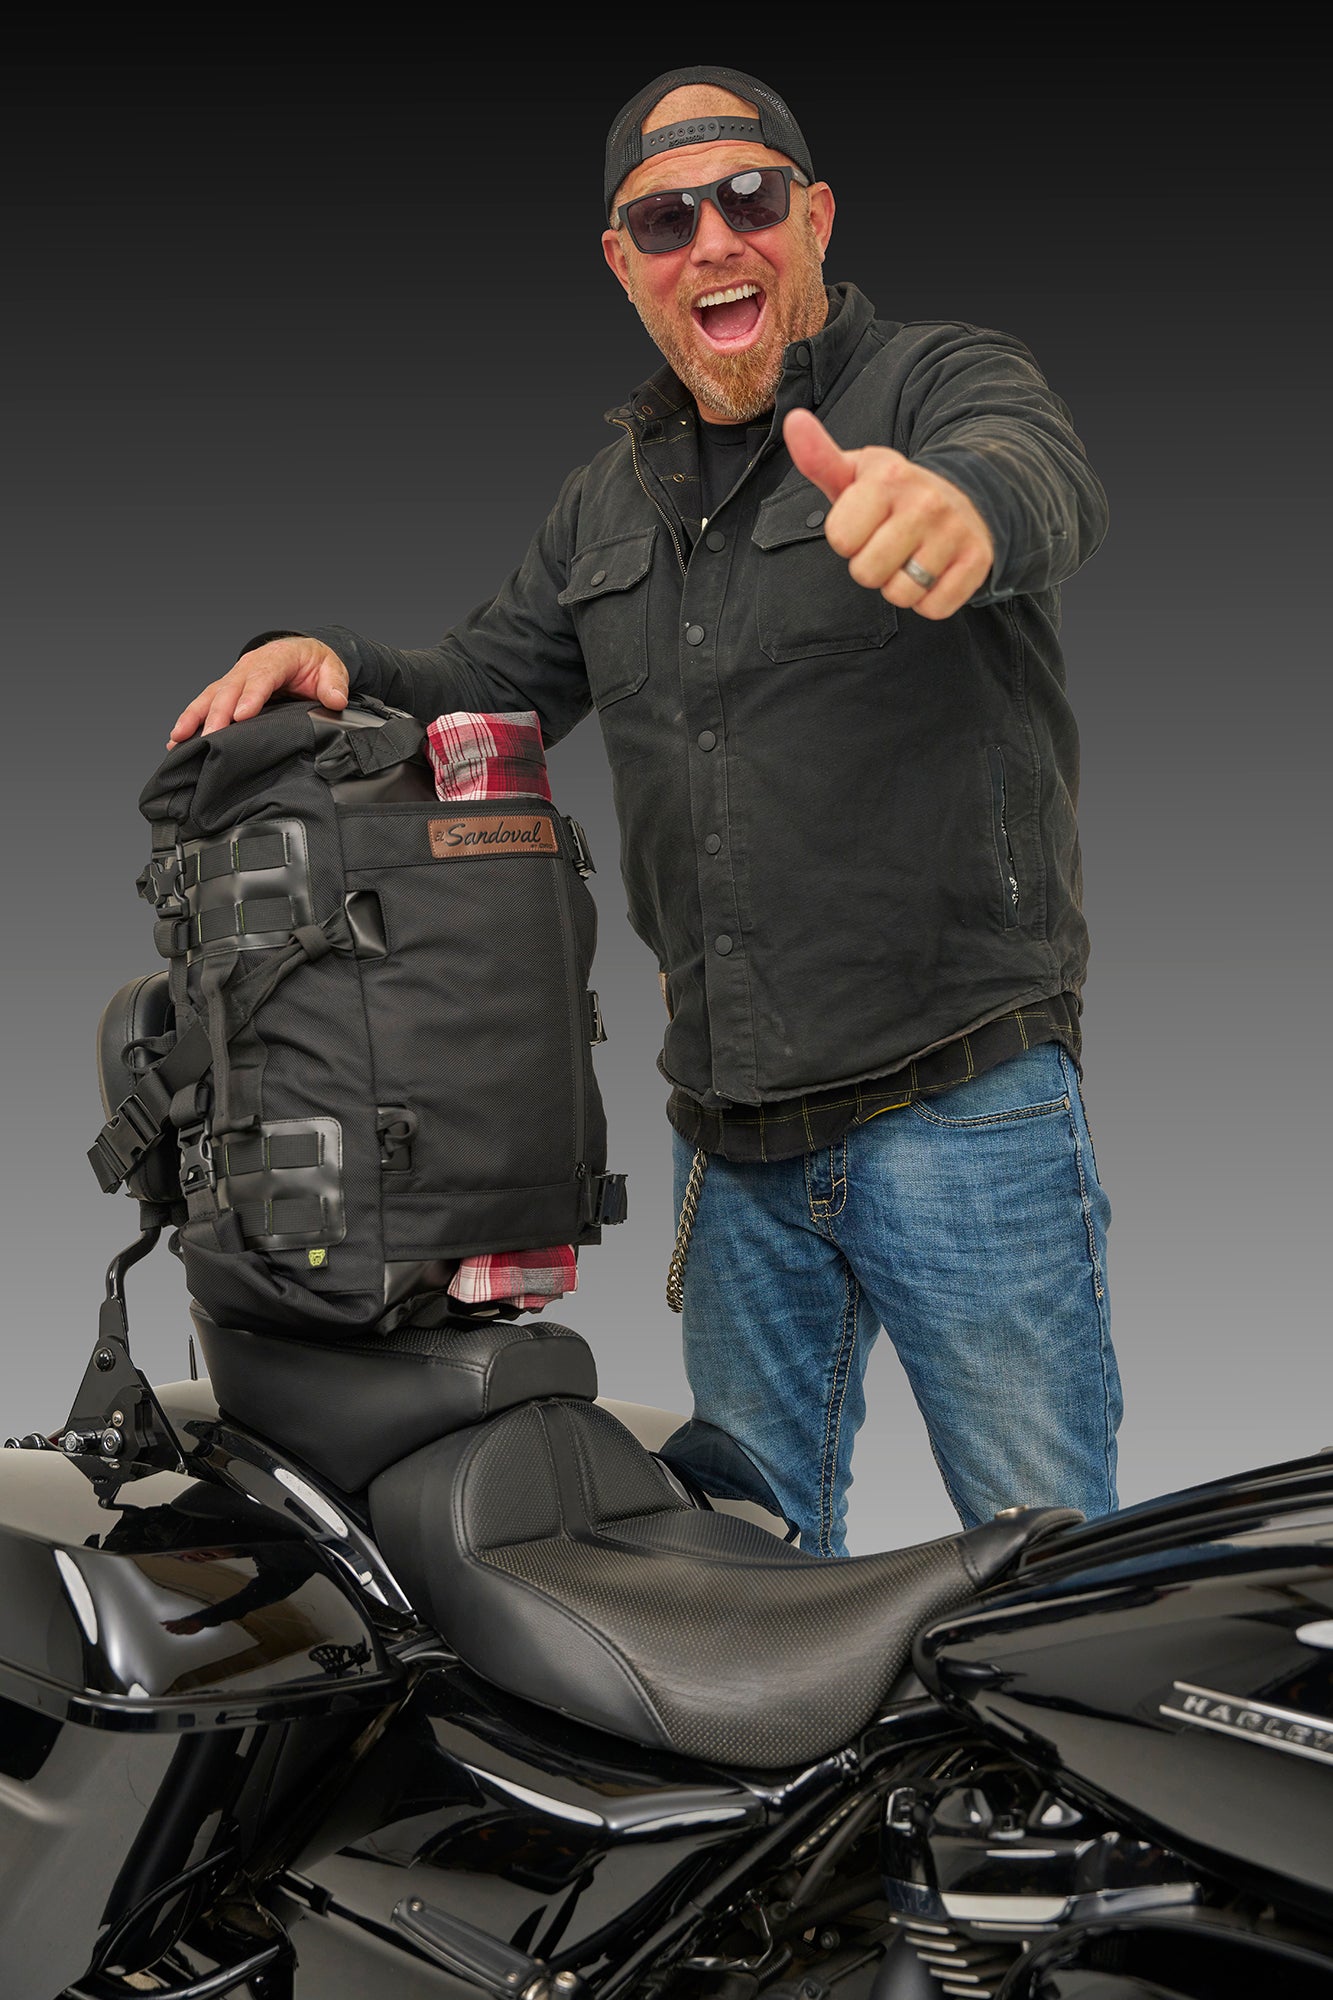 Honda Gold Wing Tour accessories | Goldstrike – Page 14